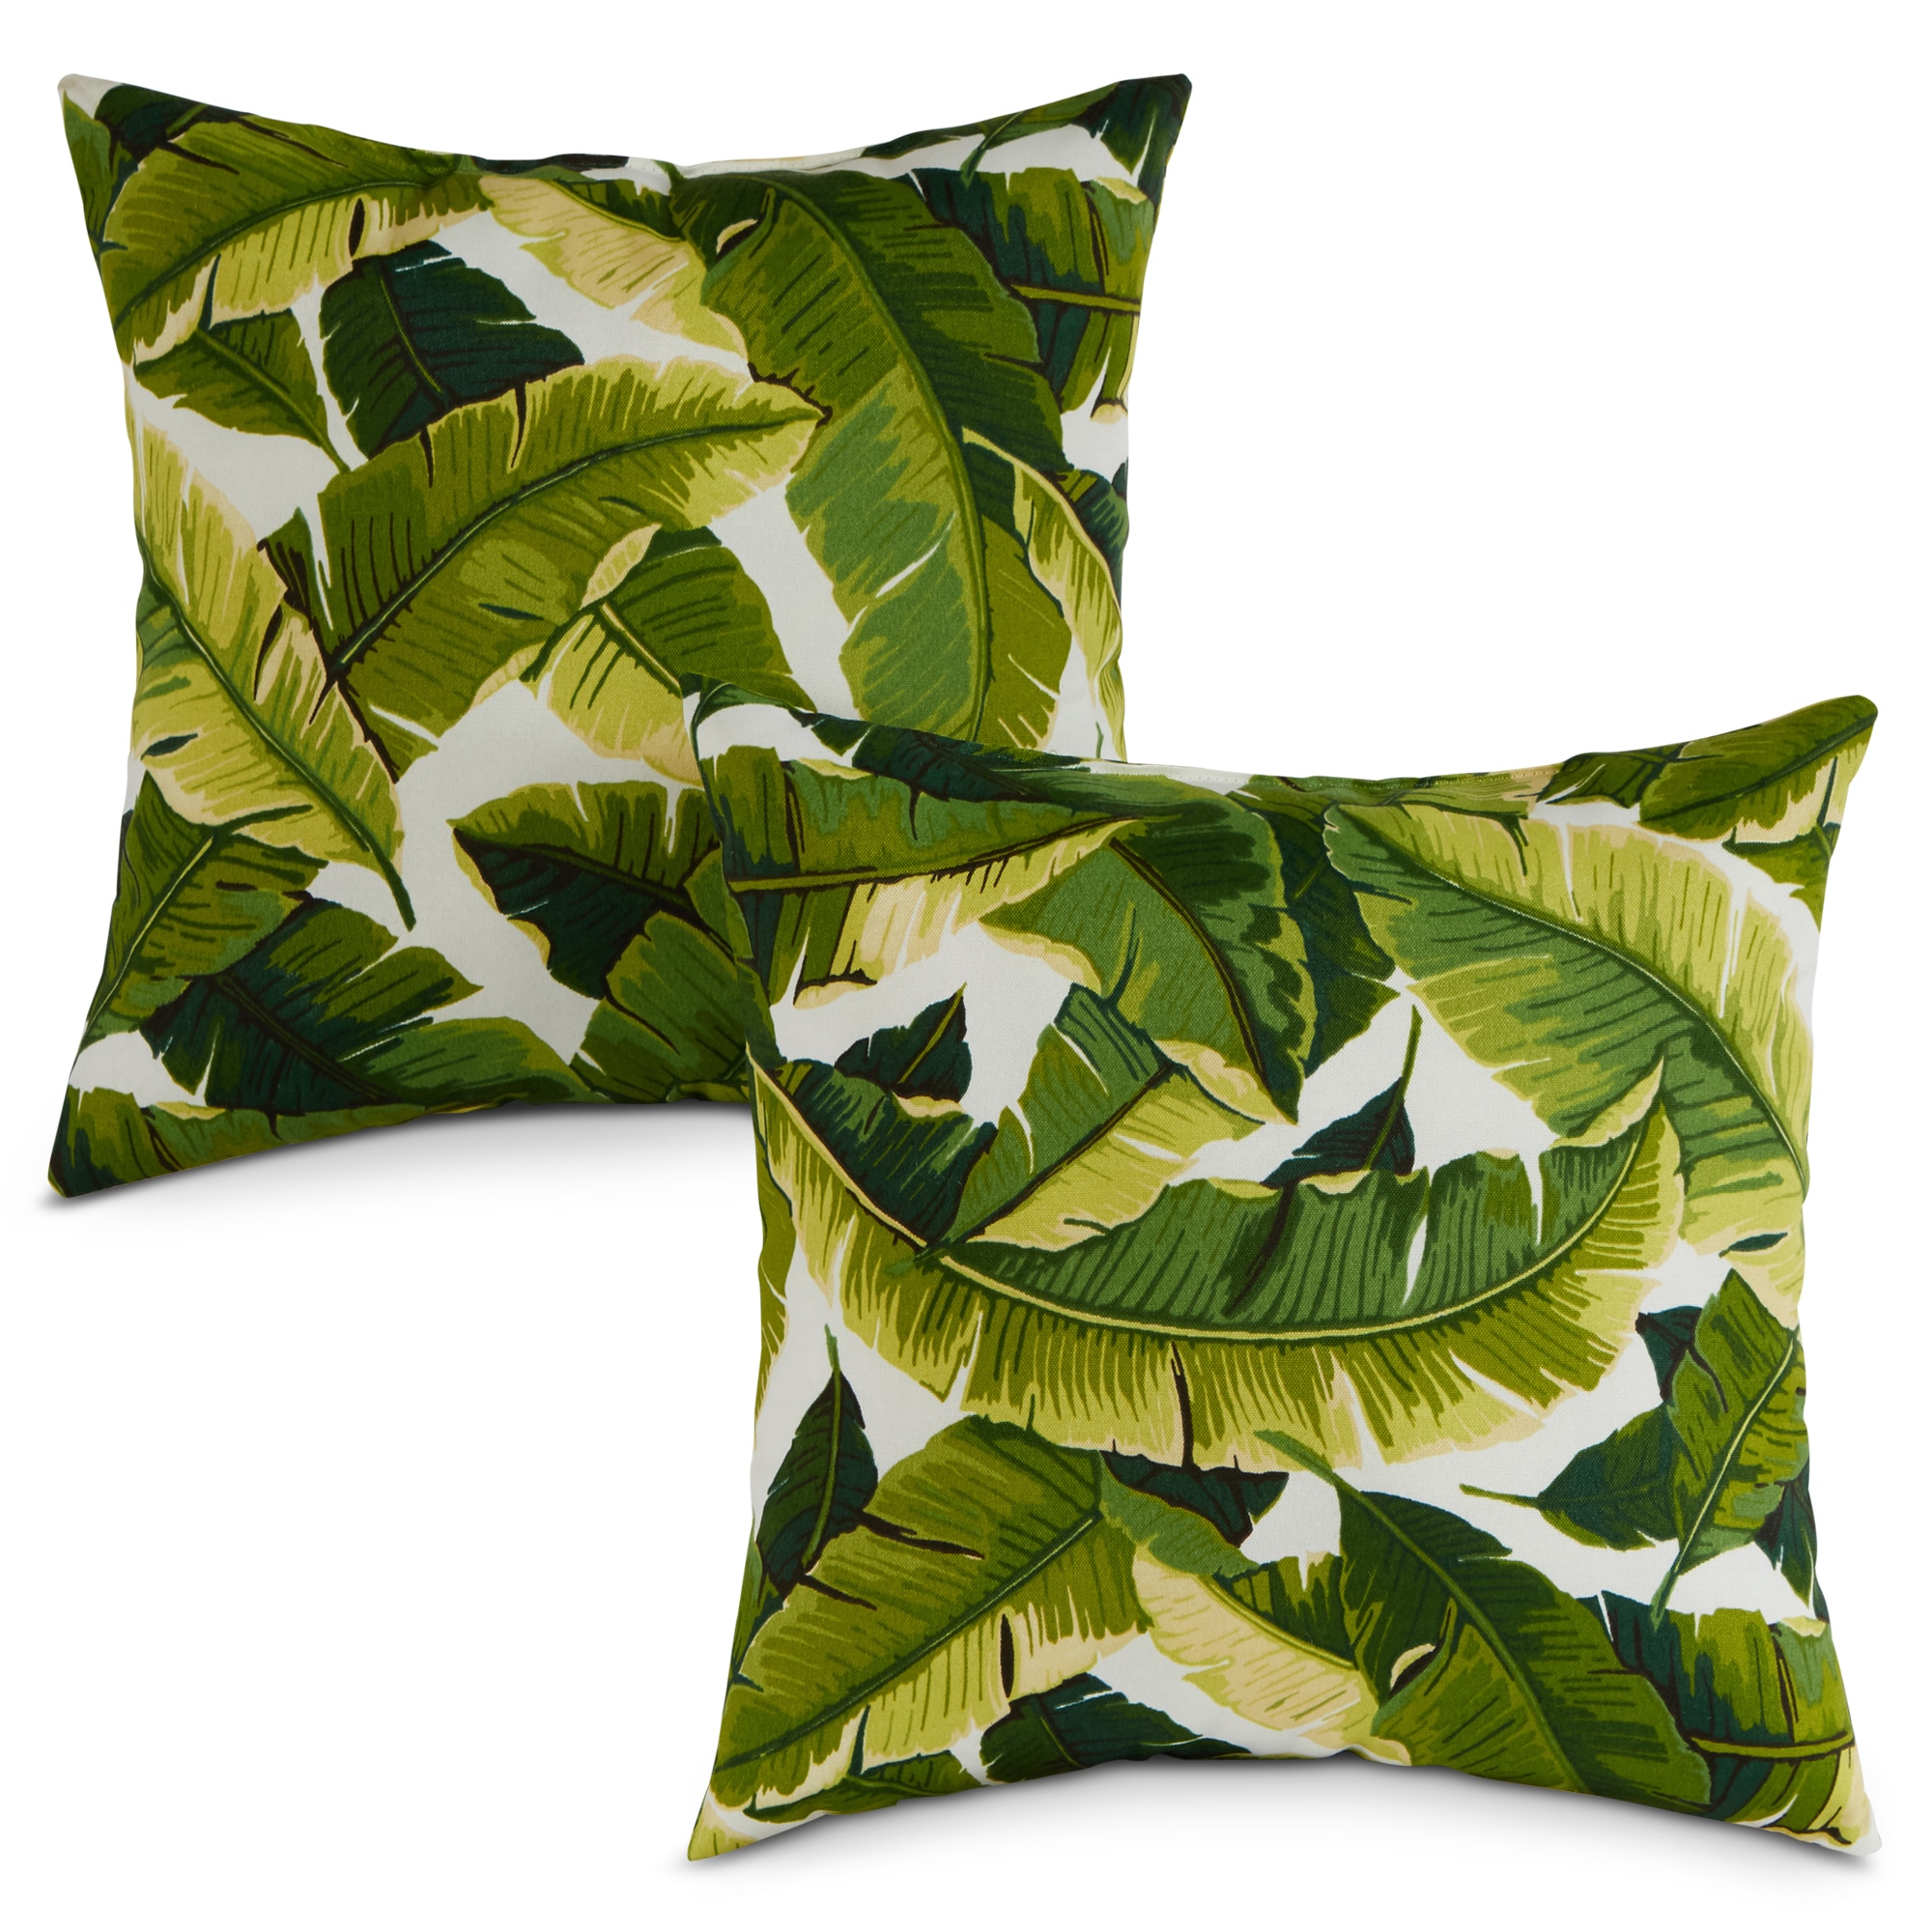 Greendale Home Fashions Outdoor Accent Pillows, Square - 2 count